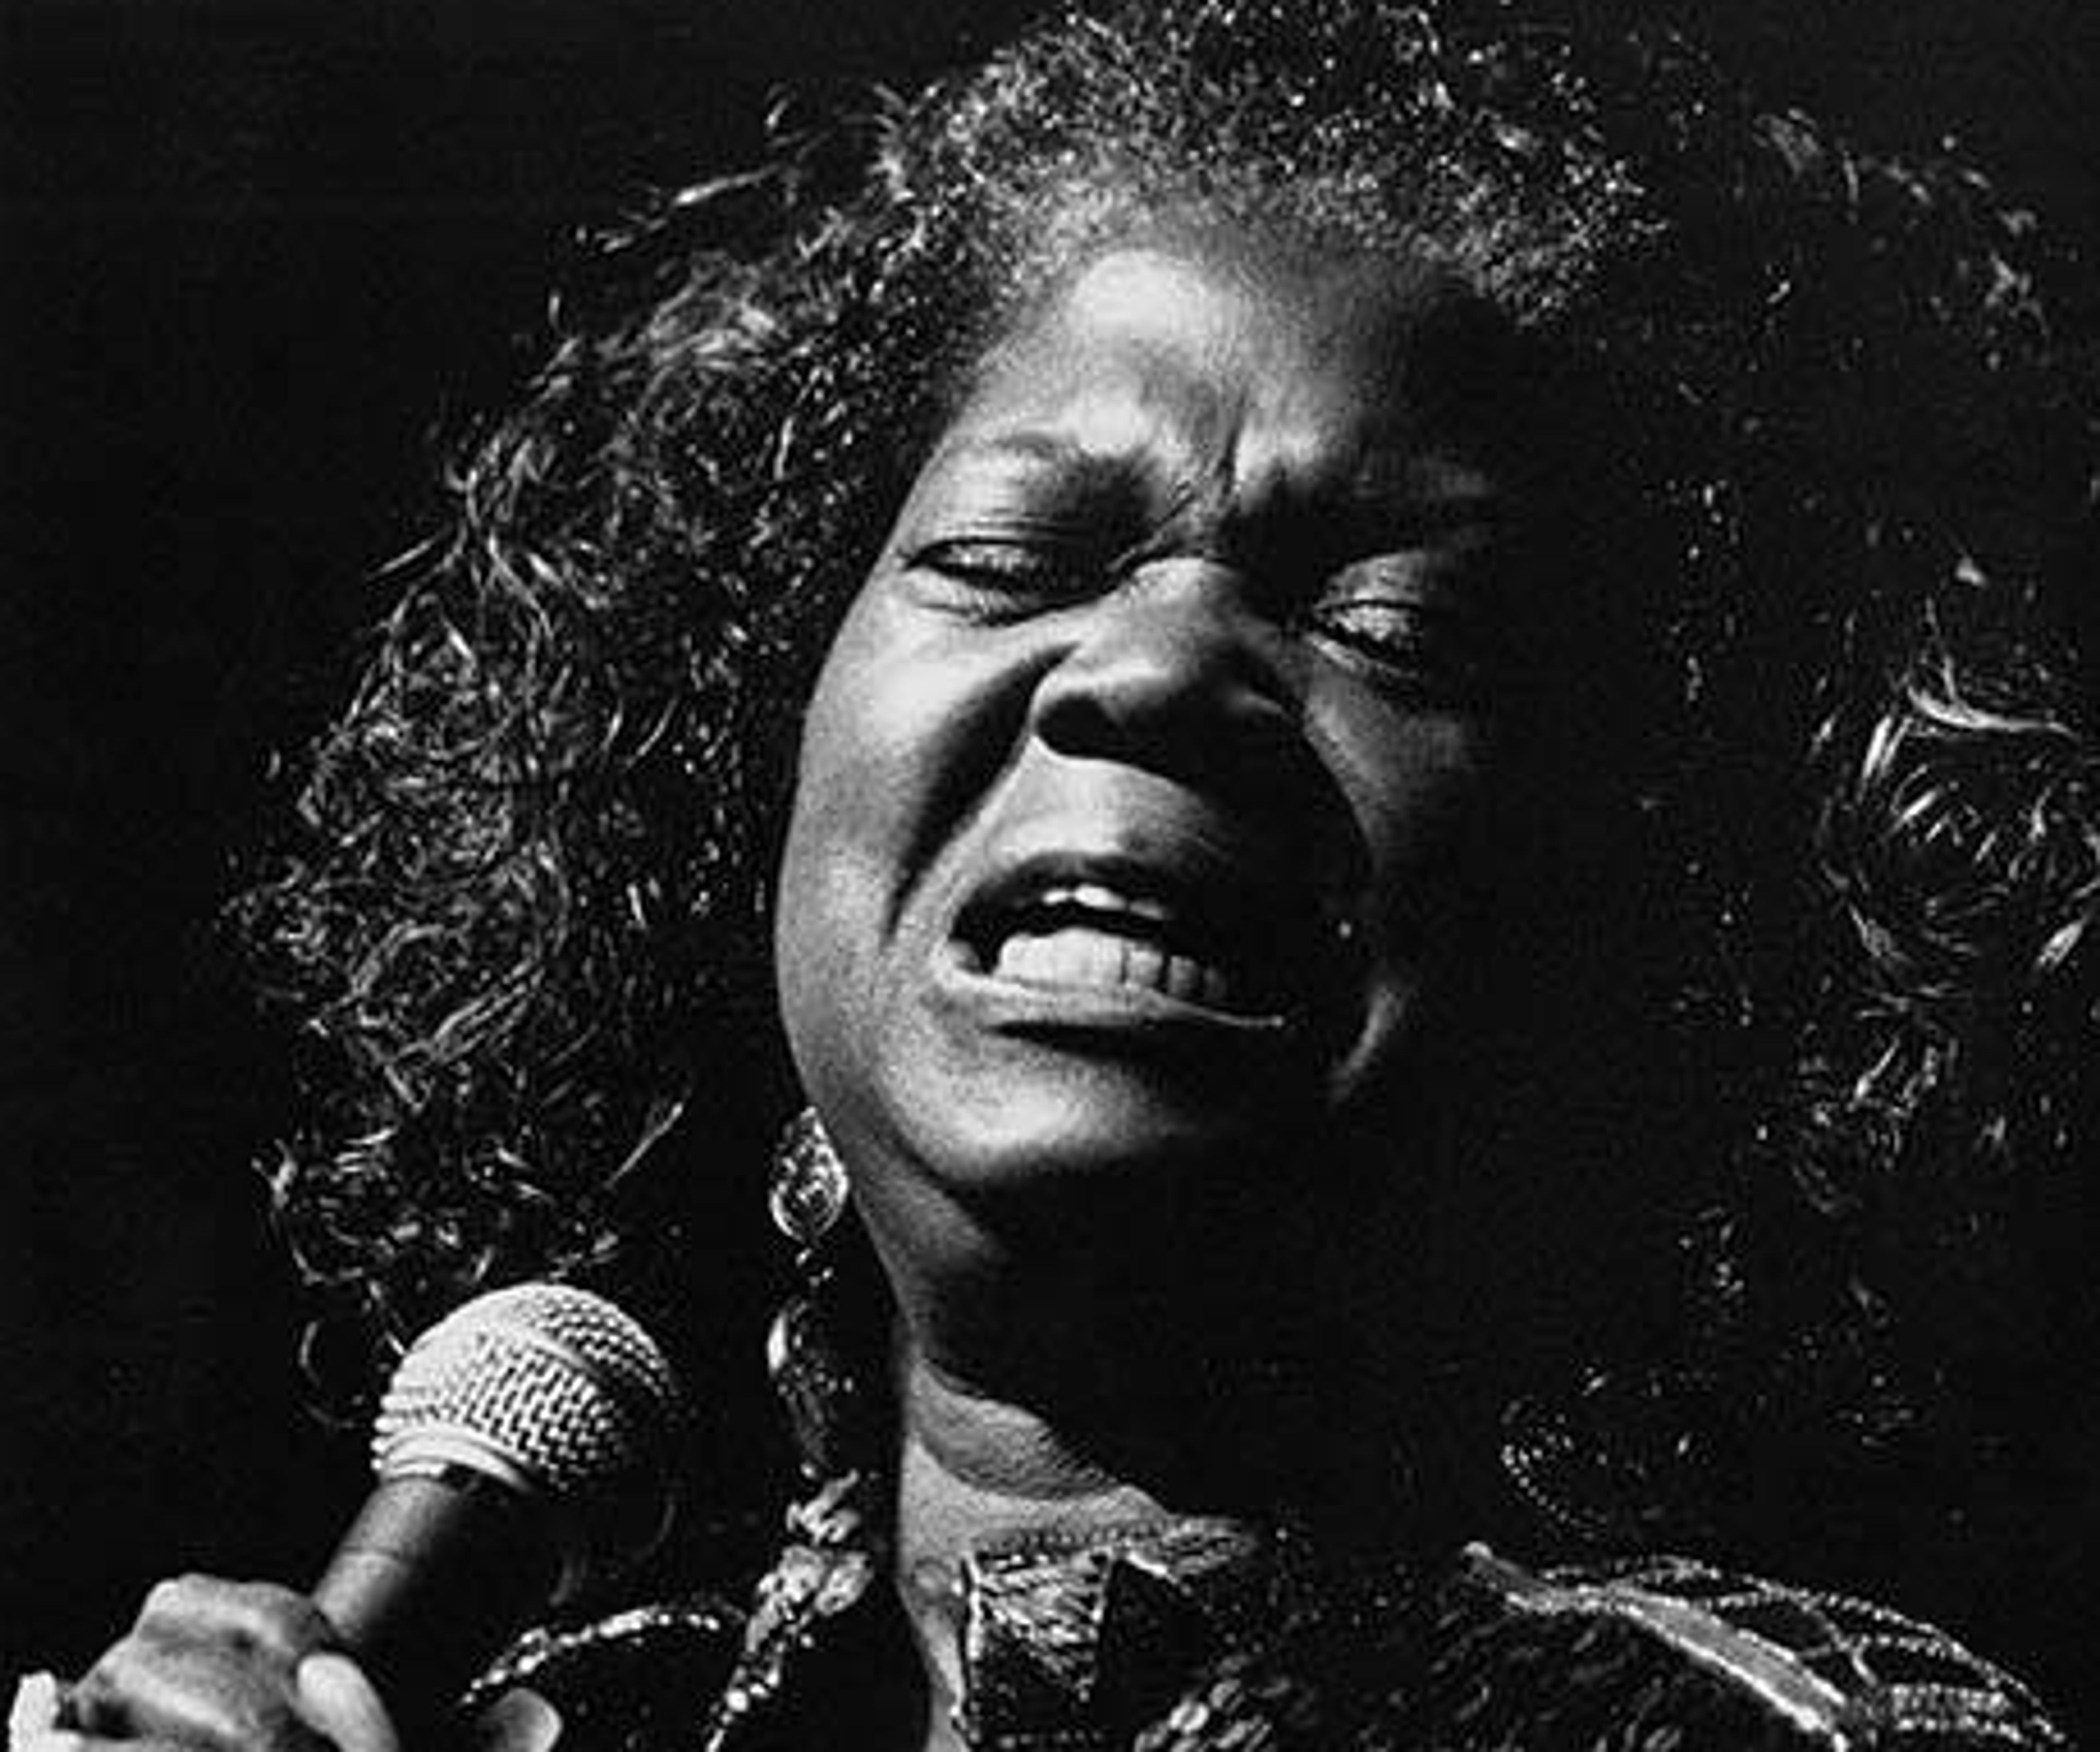 black and white image of woman singing into a microphone